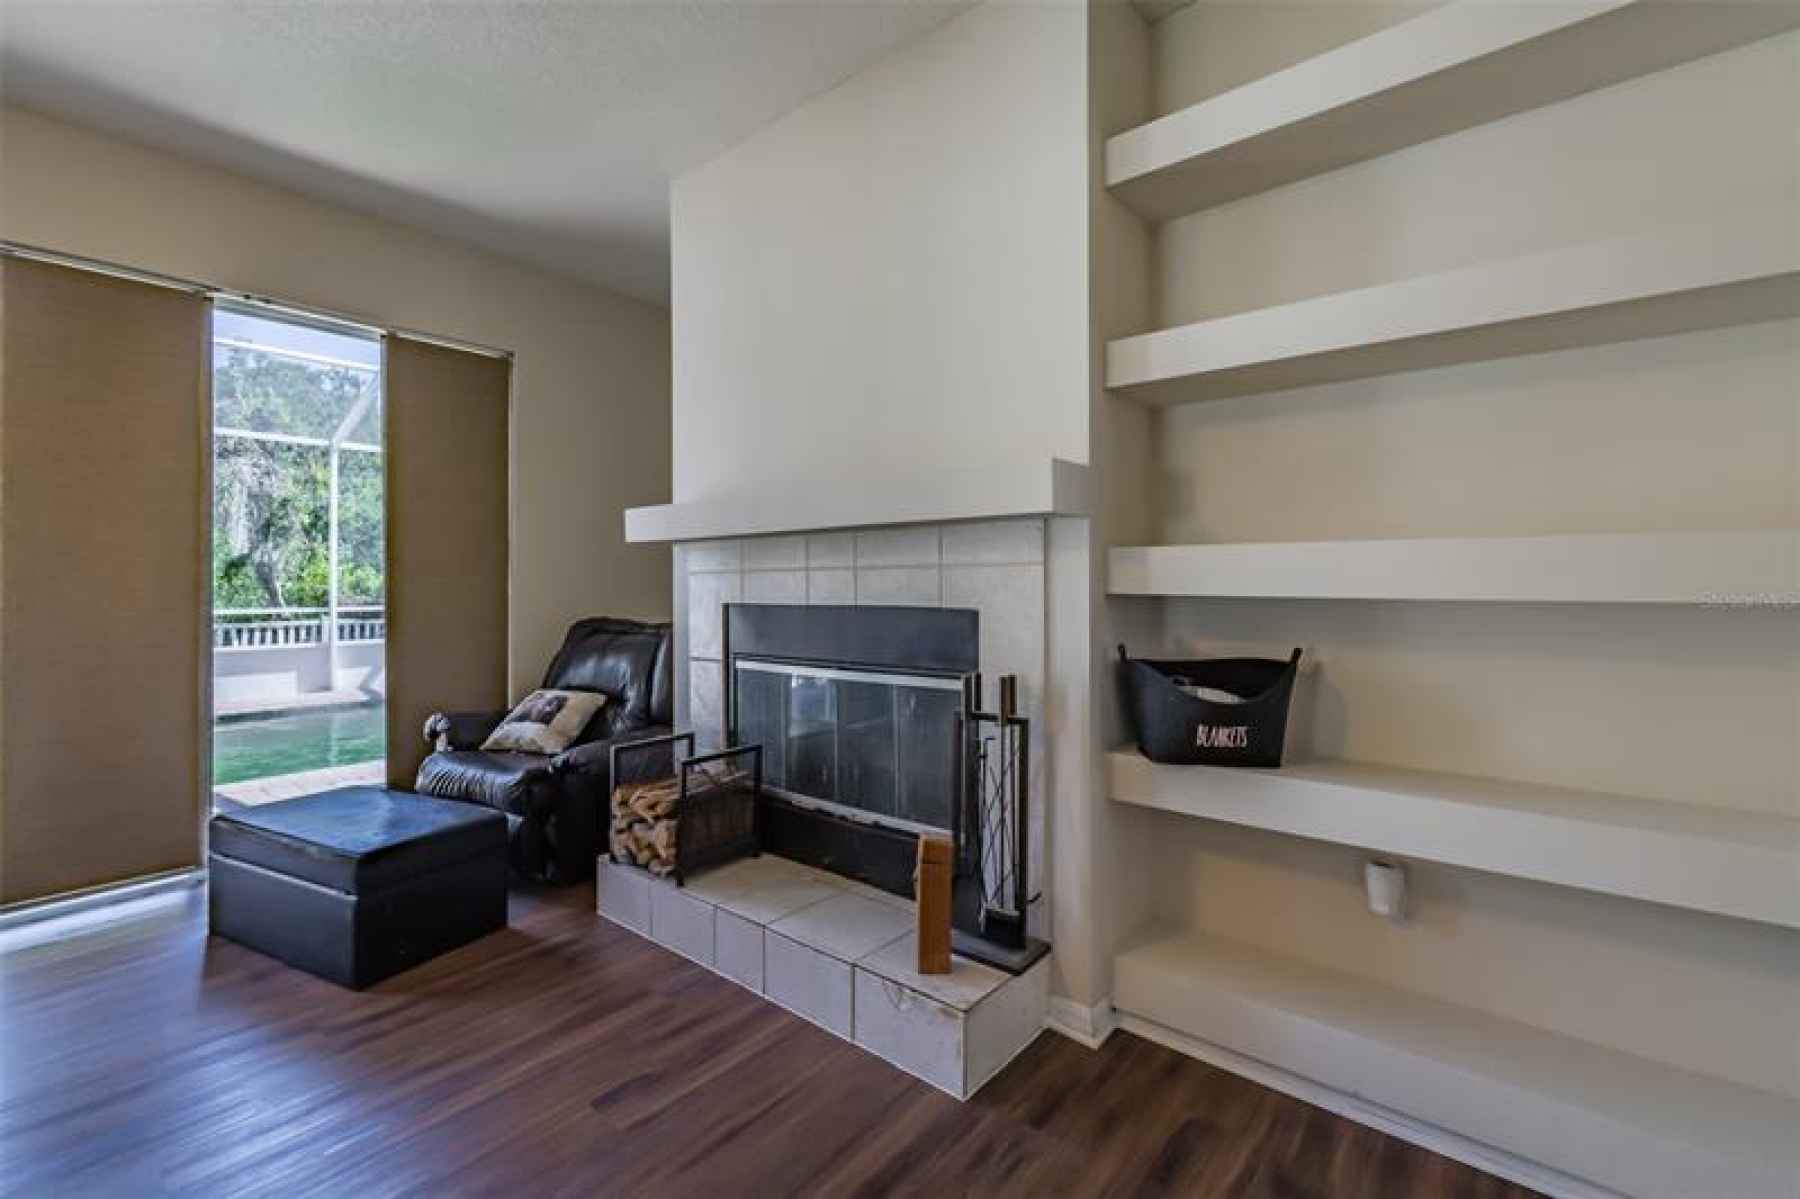 Wood burning fireplace and built in shelves in family room